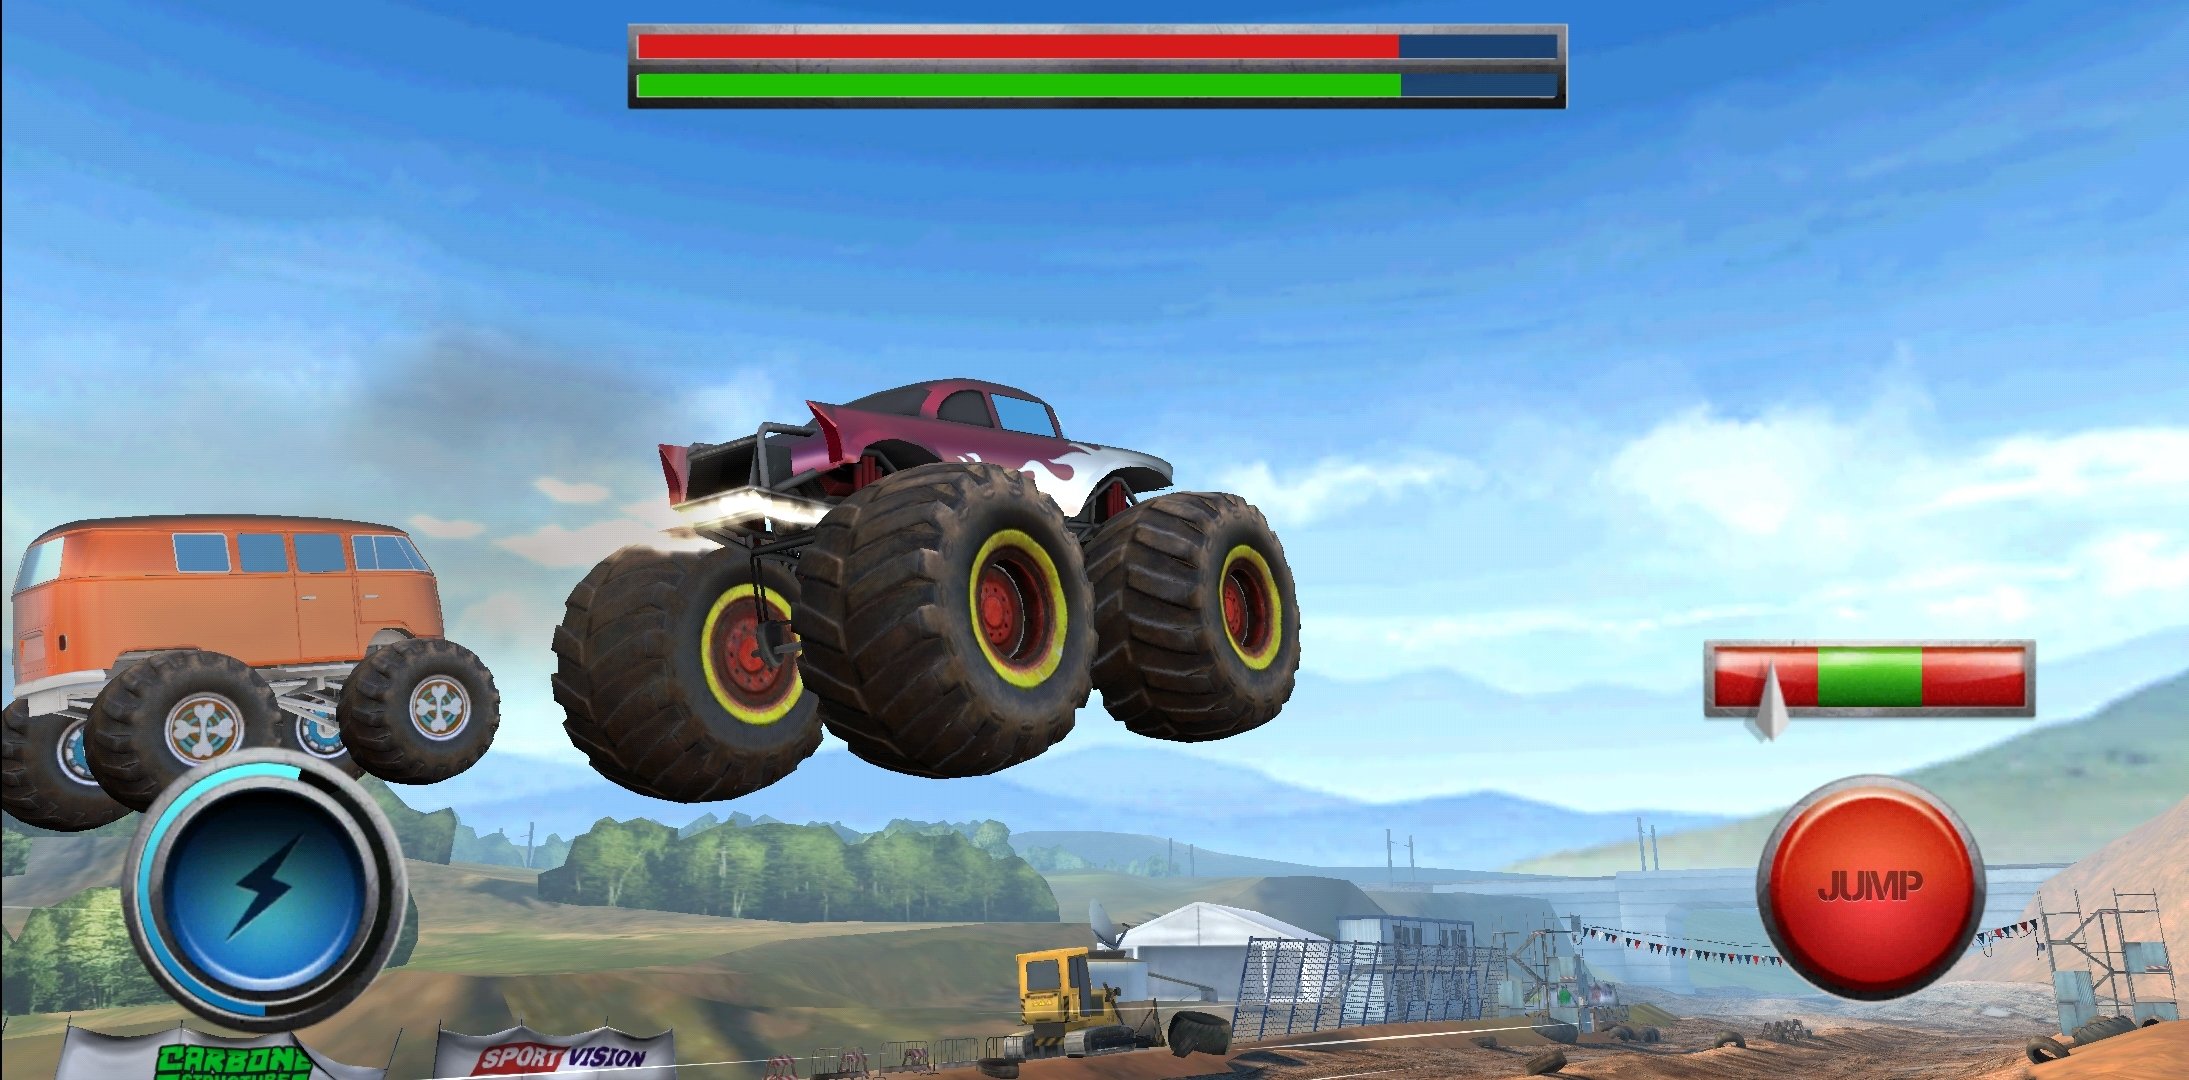 Racing Xtreme 2: Monster Truck - Apps on Google Play